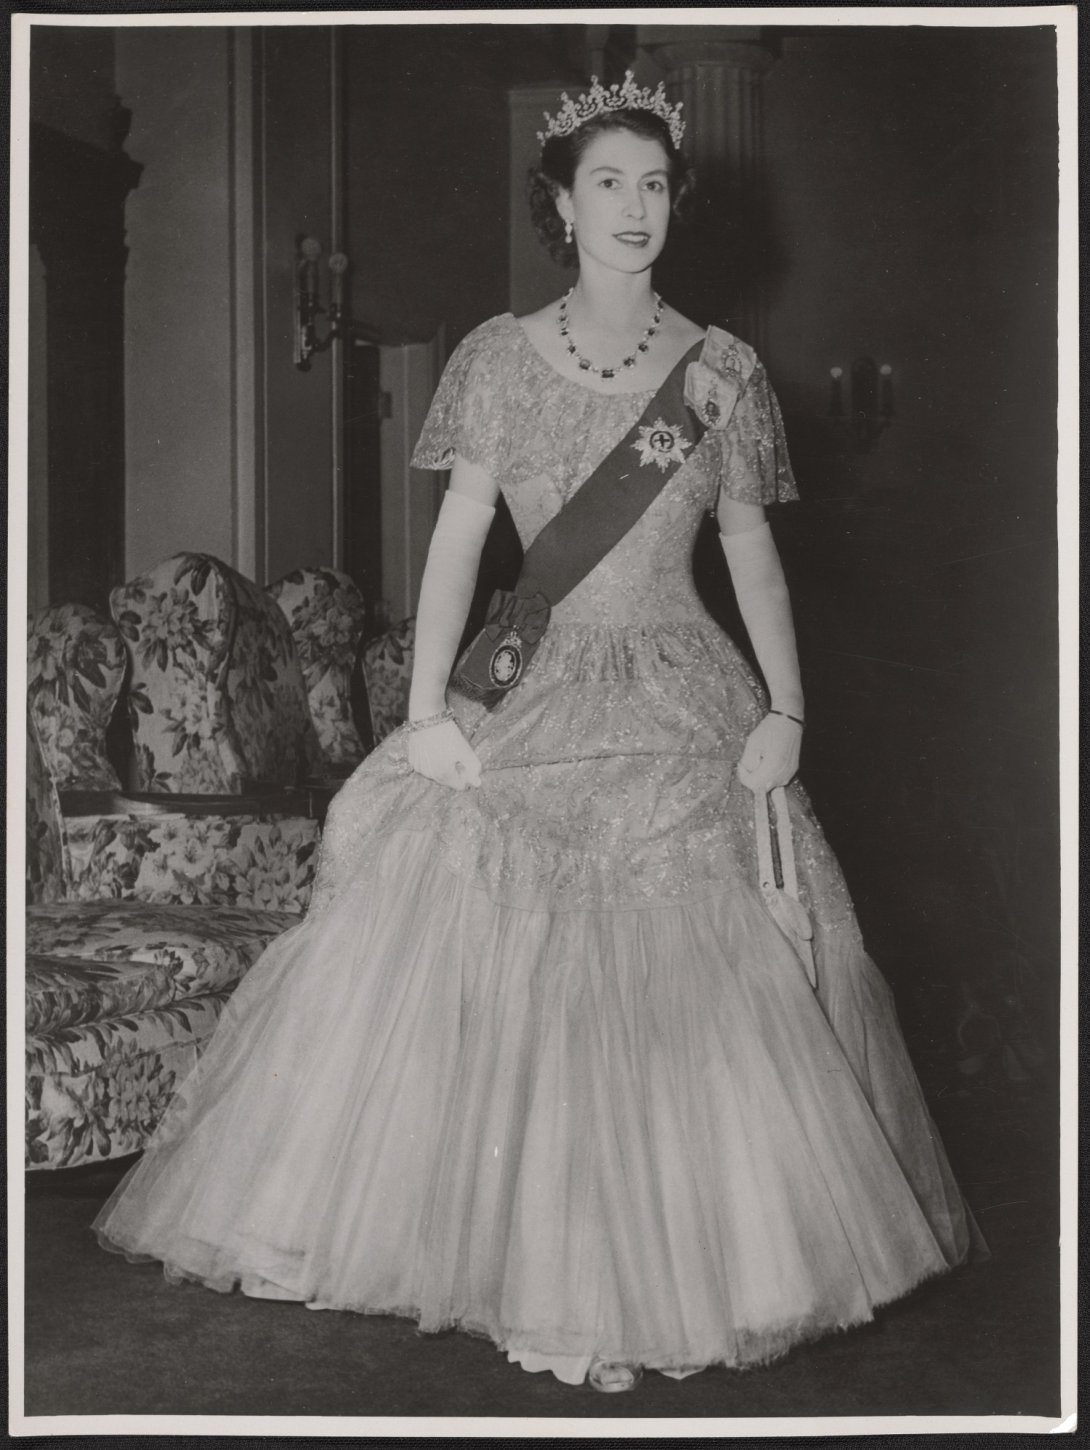 A black and white image of the Queen in 1954 dressed in full formal dinner attire.